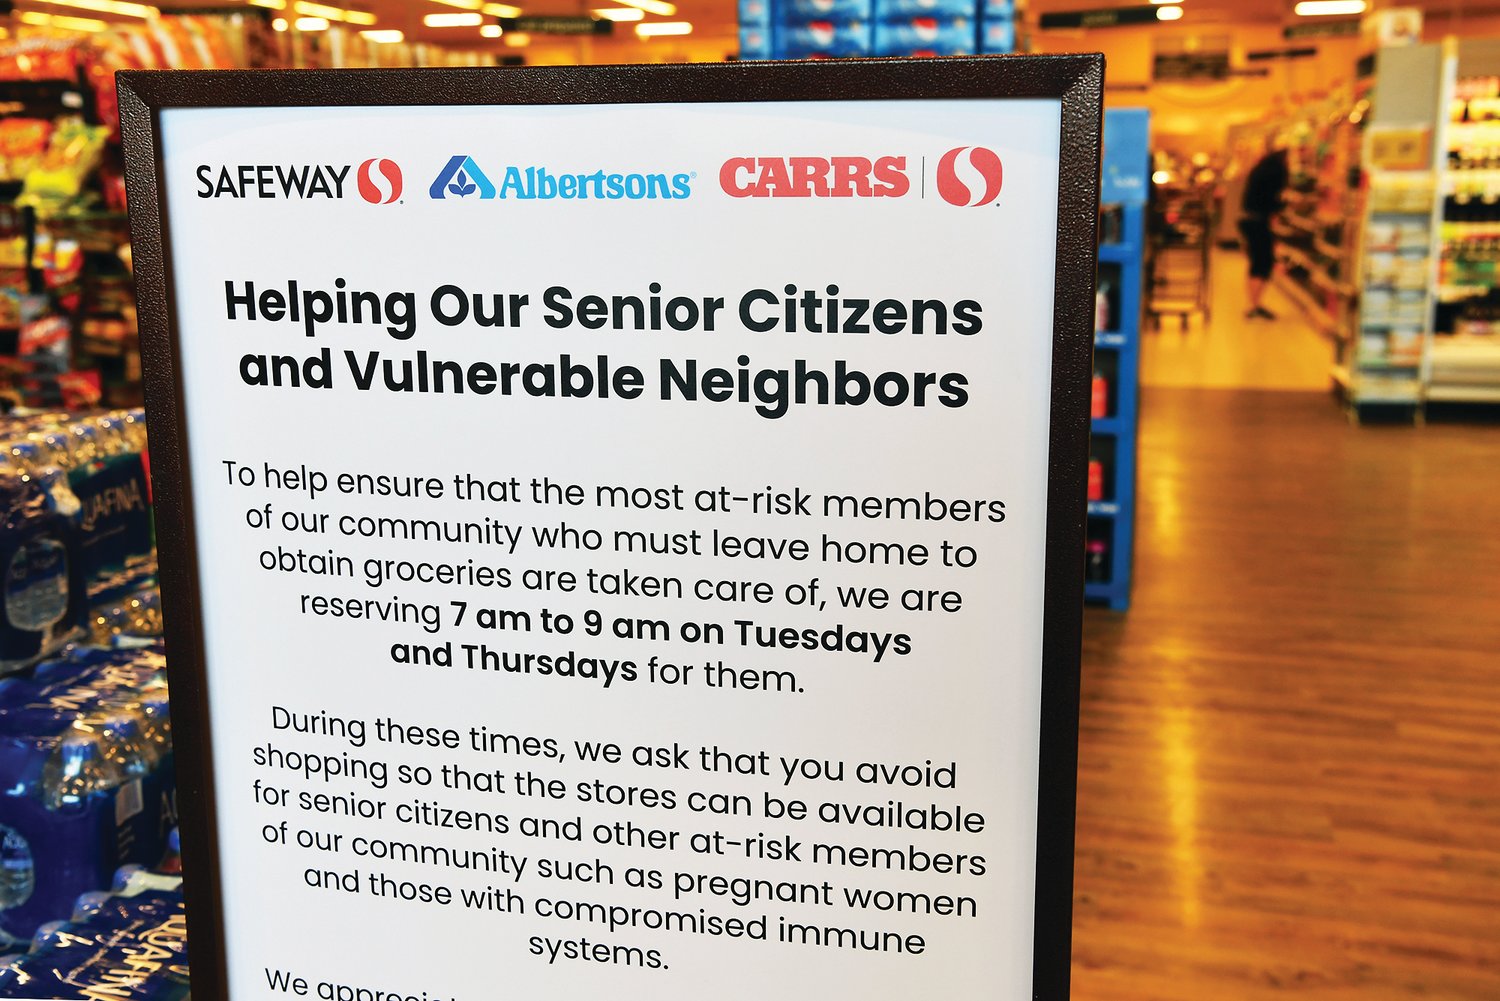 A sign on March 23 near the entrance to Yelm Safeway tells another tale of COVID-19, this one to help shield seniors and other at-risk shoppers from crowds that could pass on the virus.